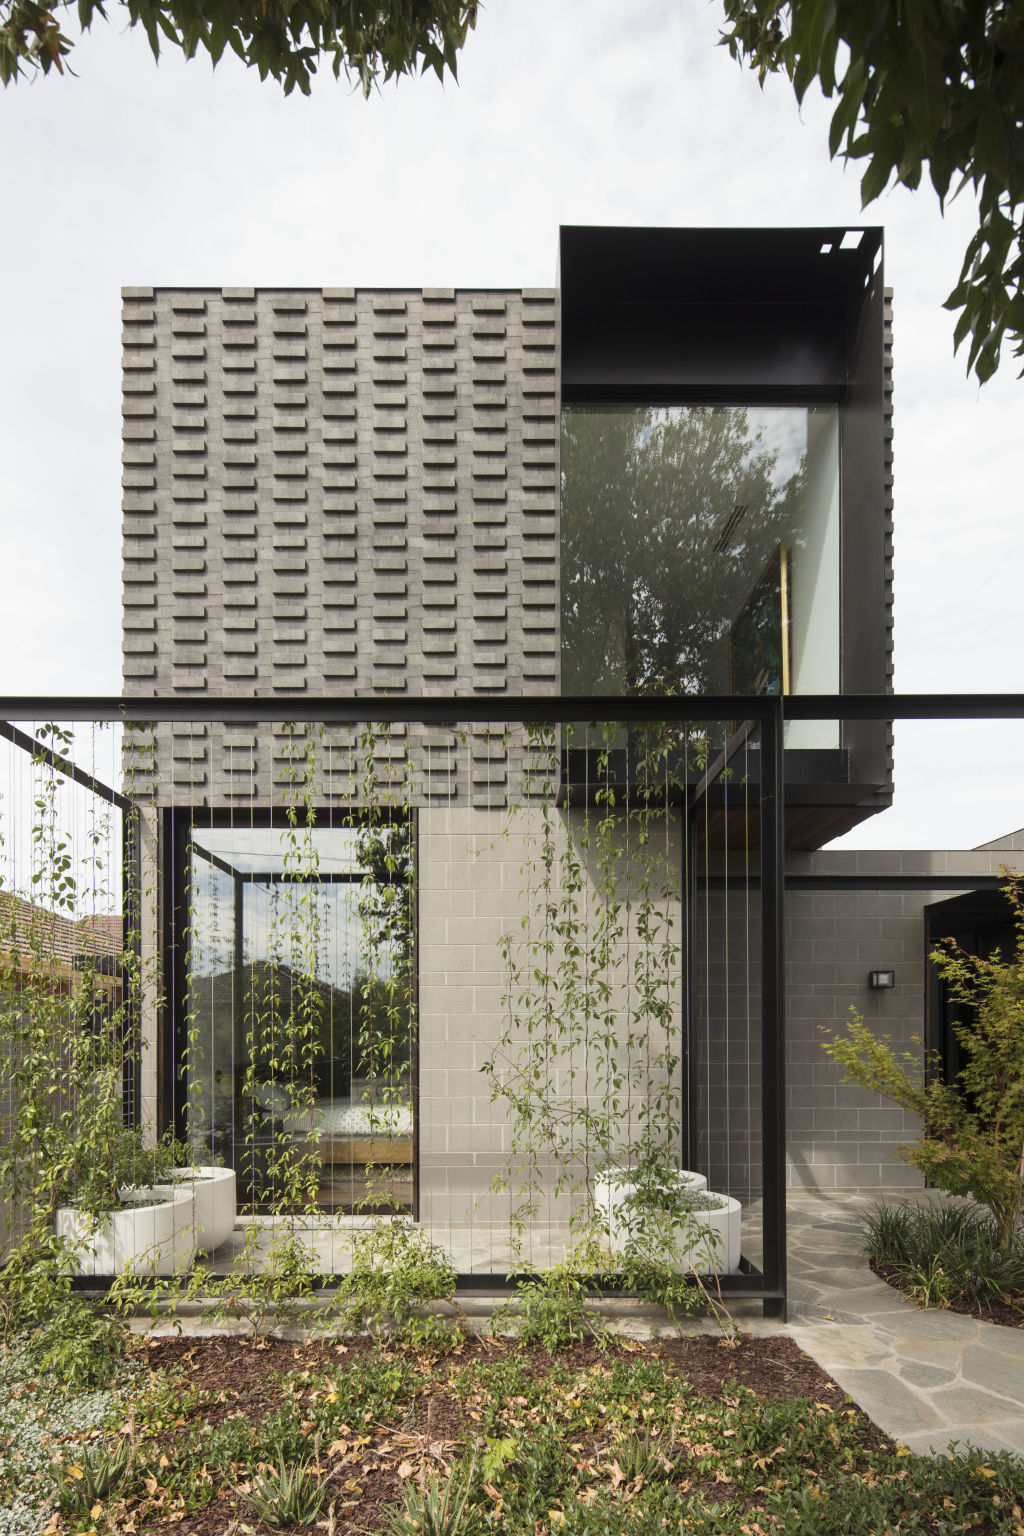 The two-level, grey brick house in Strathmore. Photo: Ben Hosking